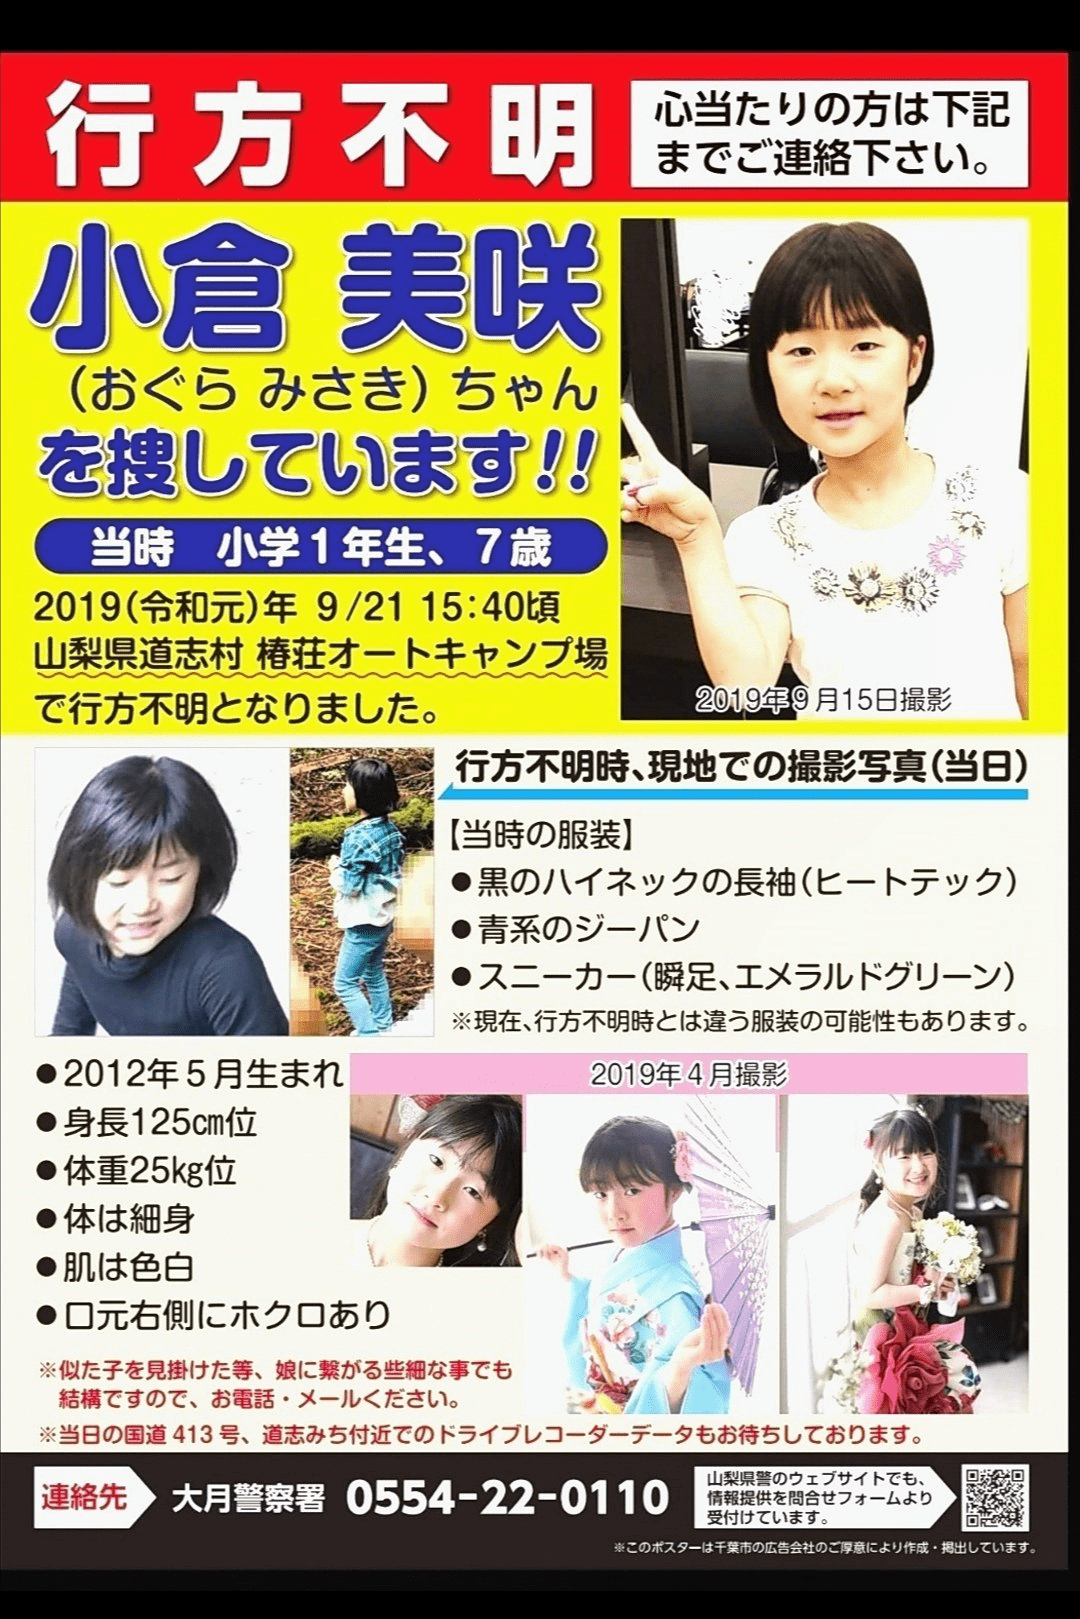 unsolved mysteries in Japan - yamanashi missing girl